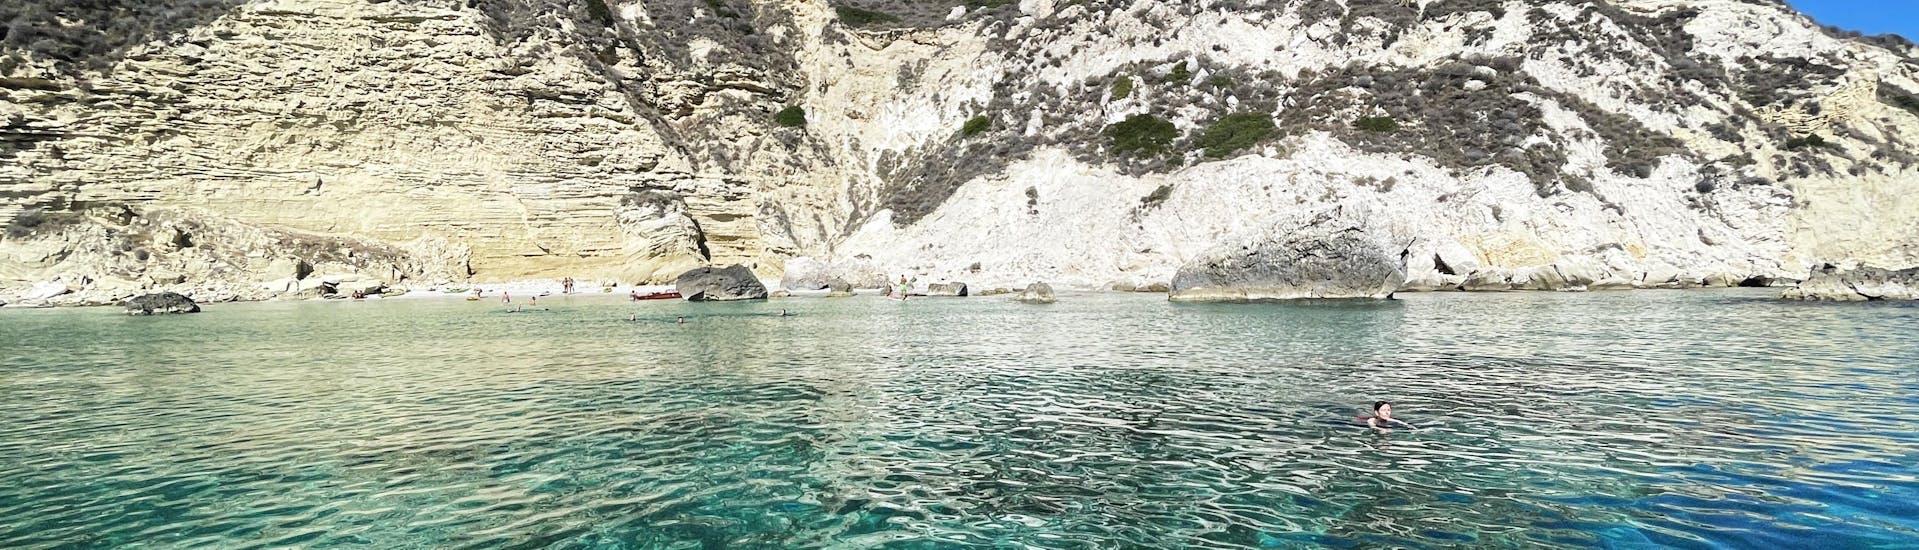 View of one of the spots that can be visited during a RIB Boat Trip from Nautisardinia Cagliari.